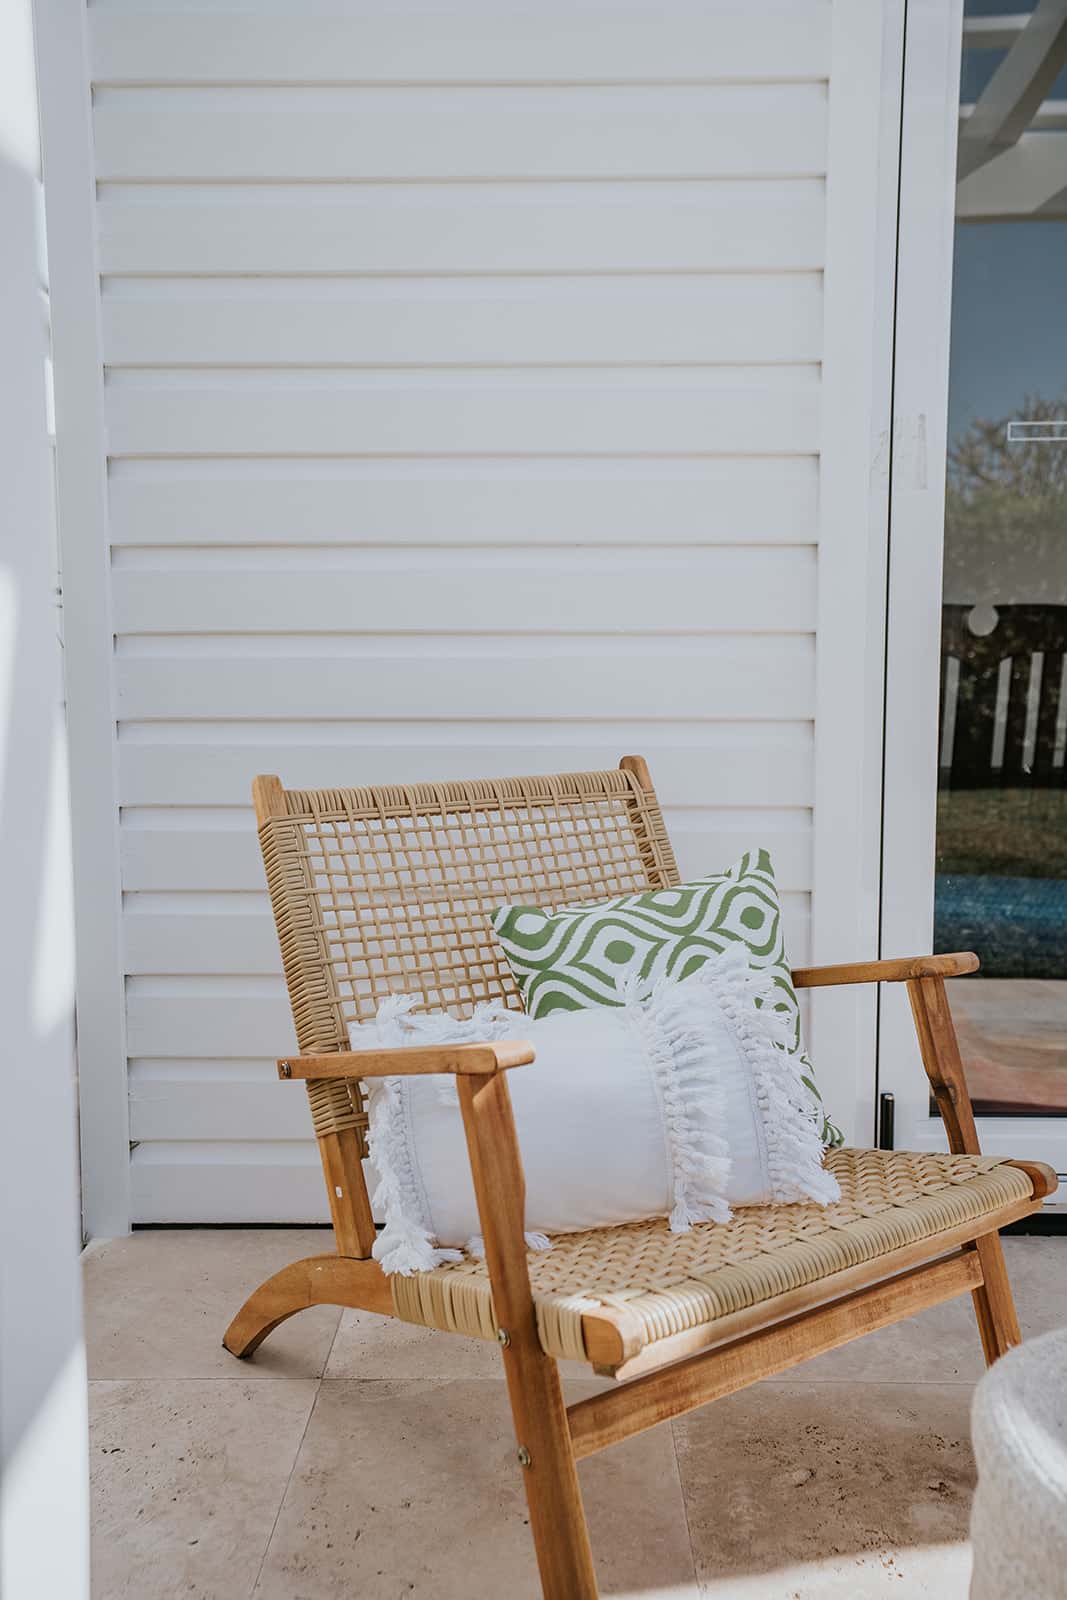 Hamptons style cladding and beach chair Locspec Building